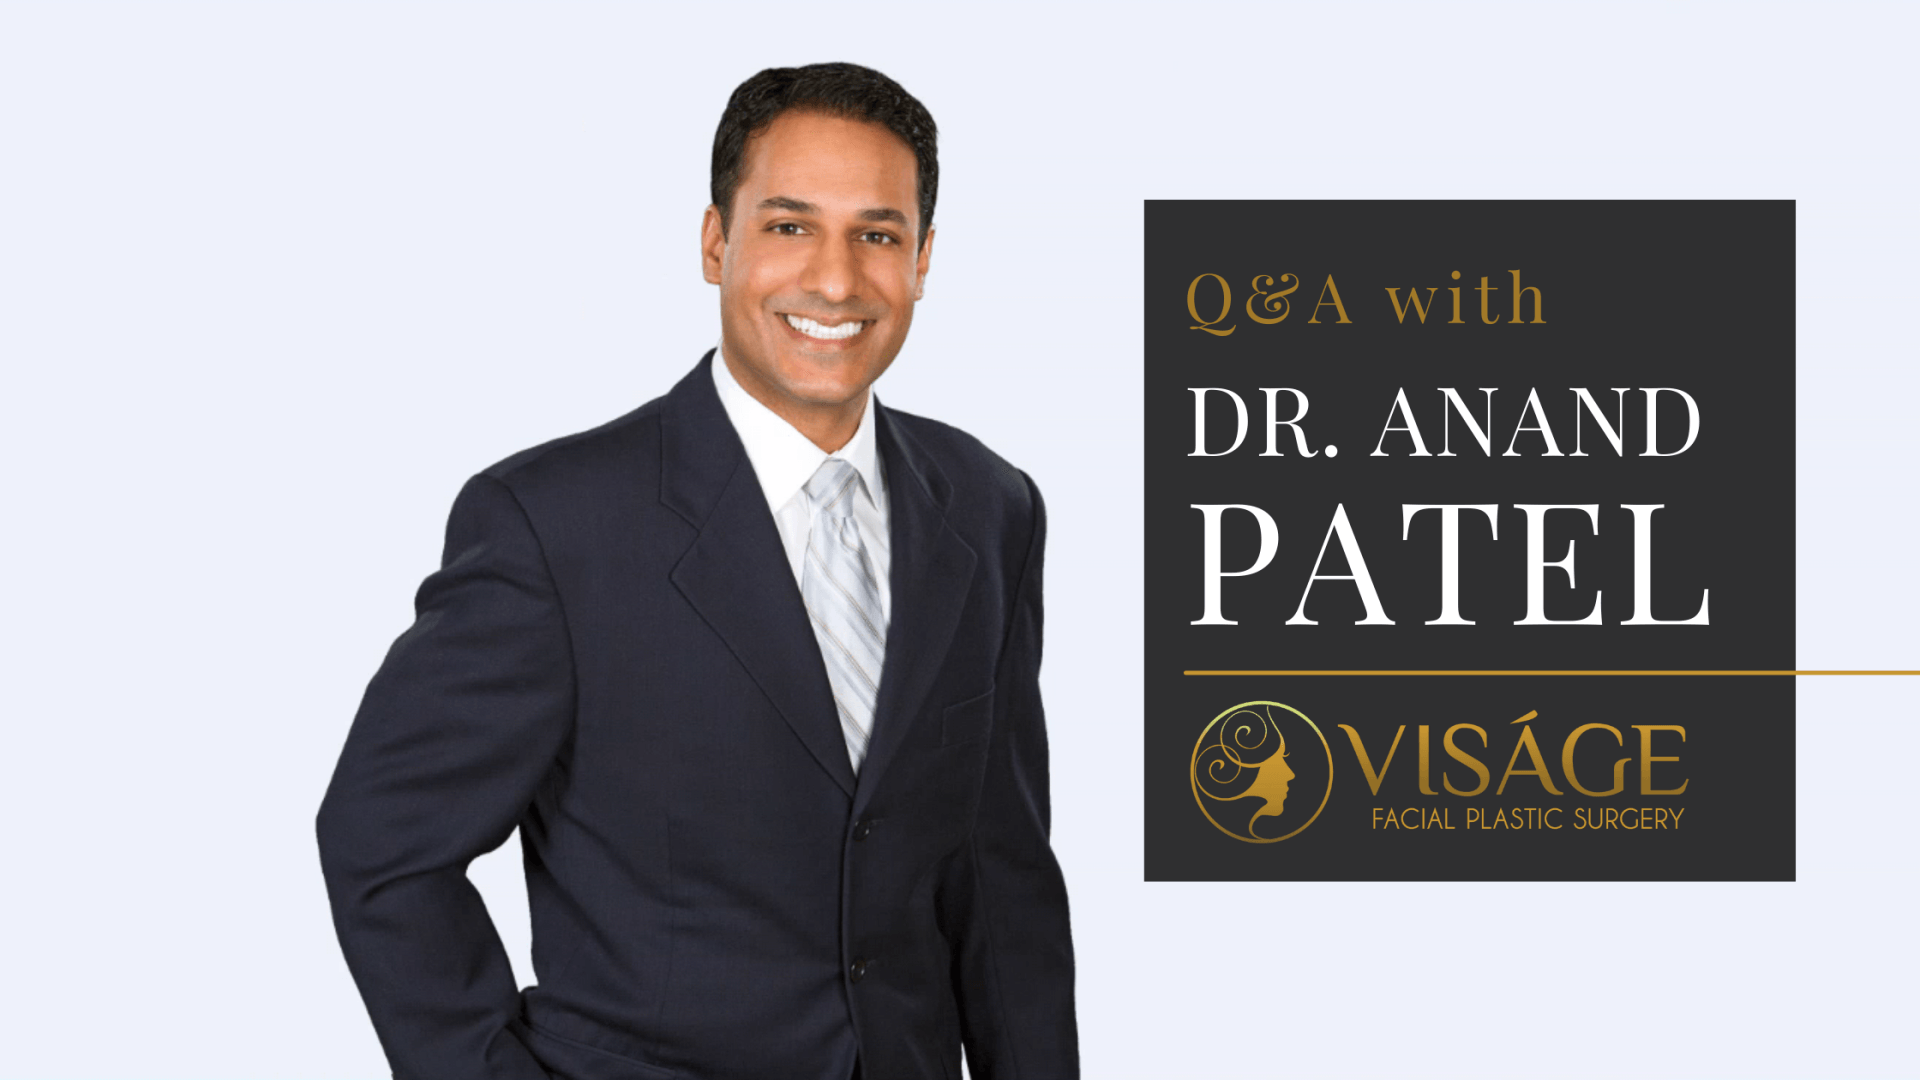 Q&A with Dr. Anand Patel